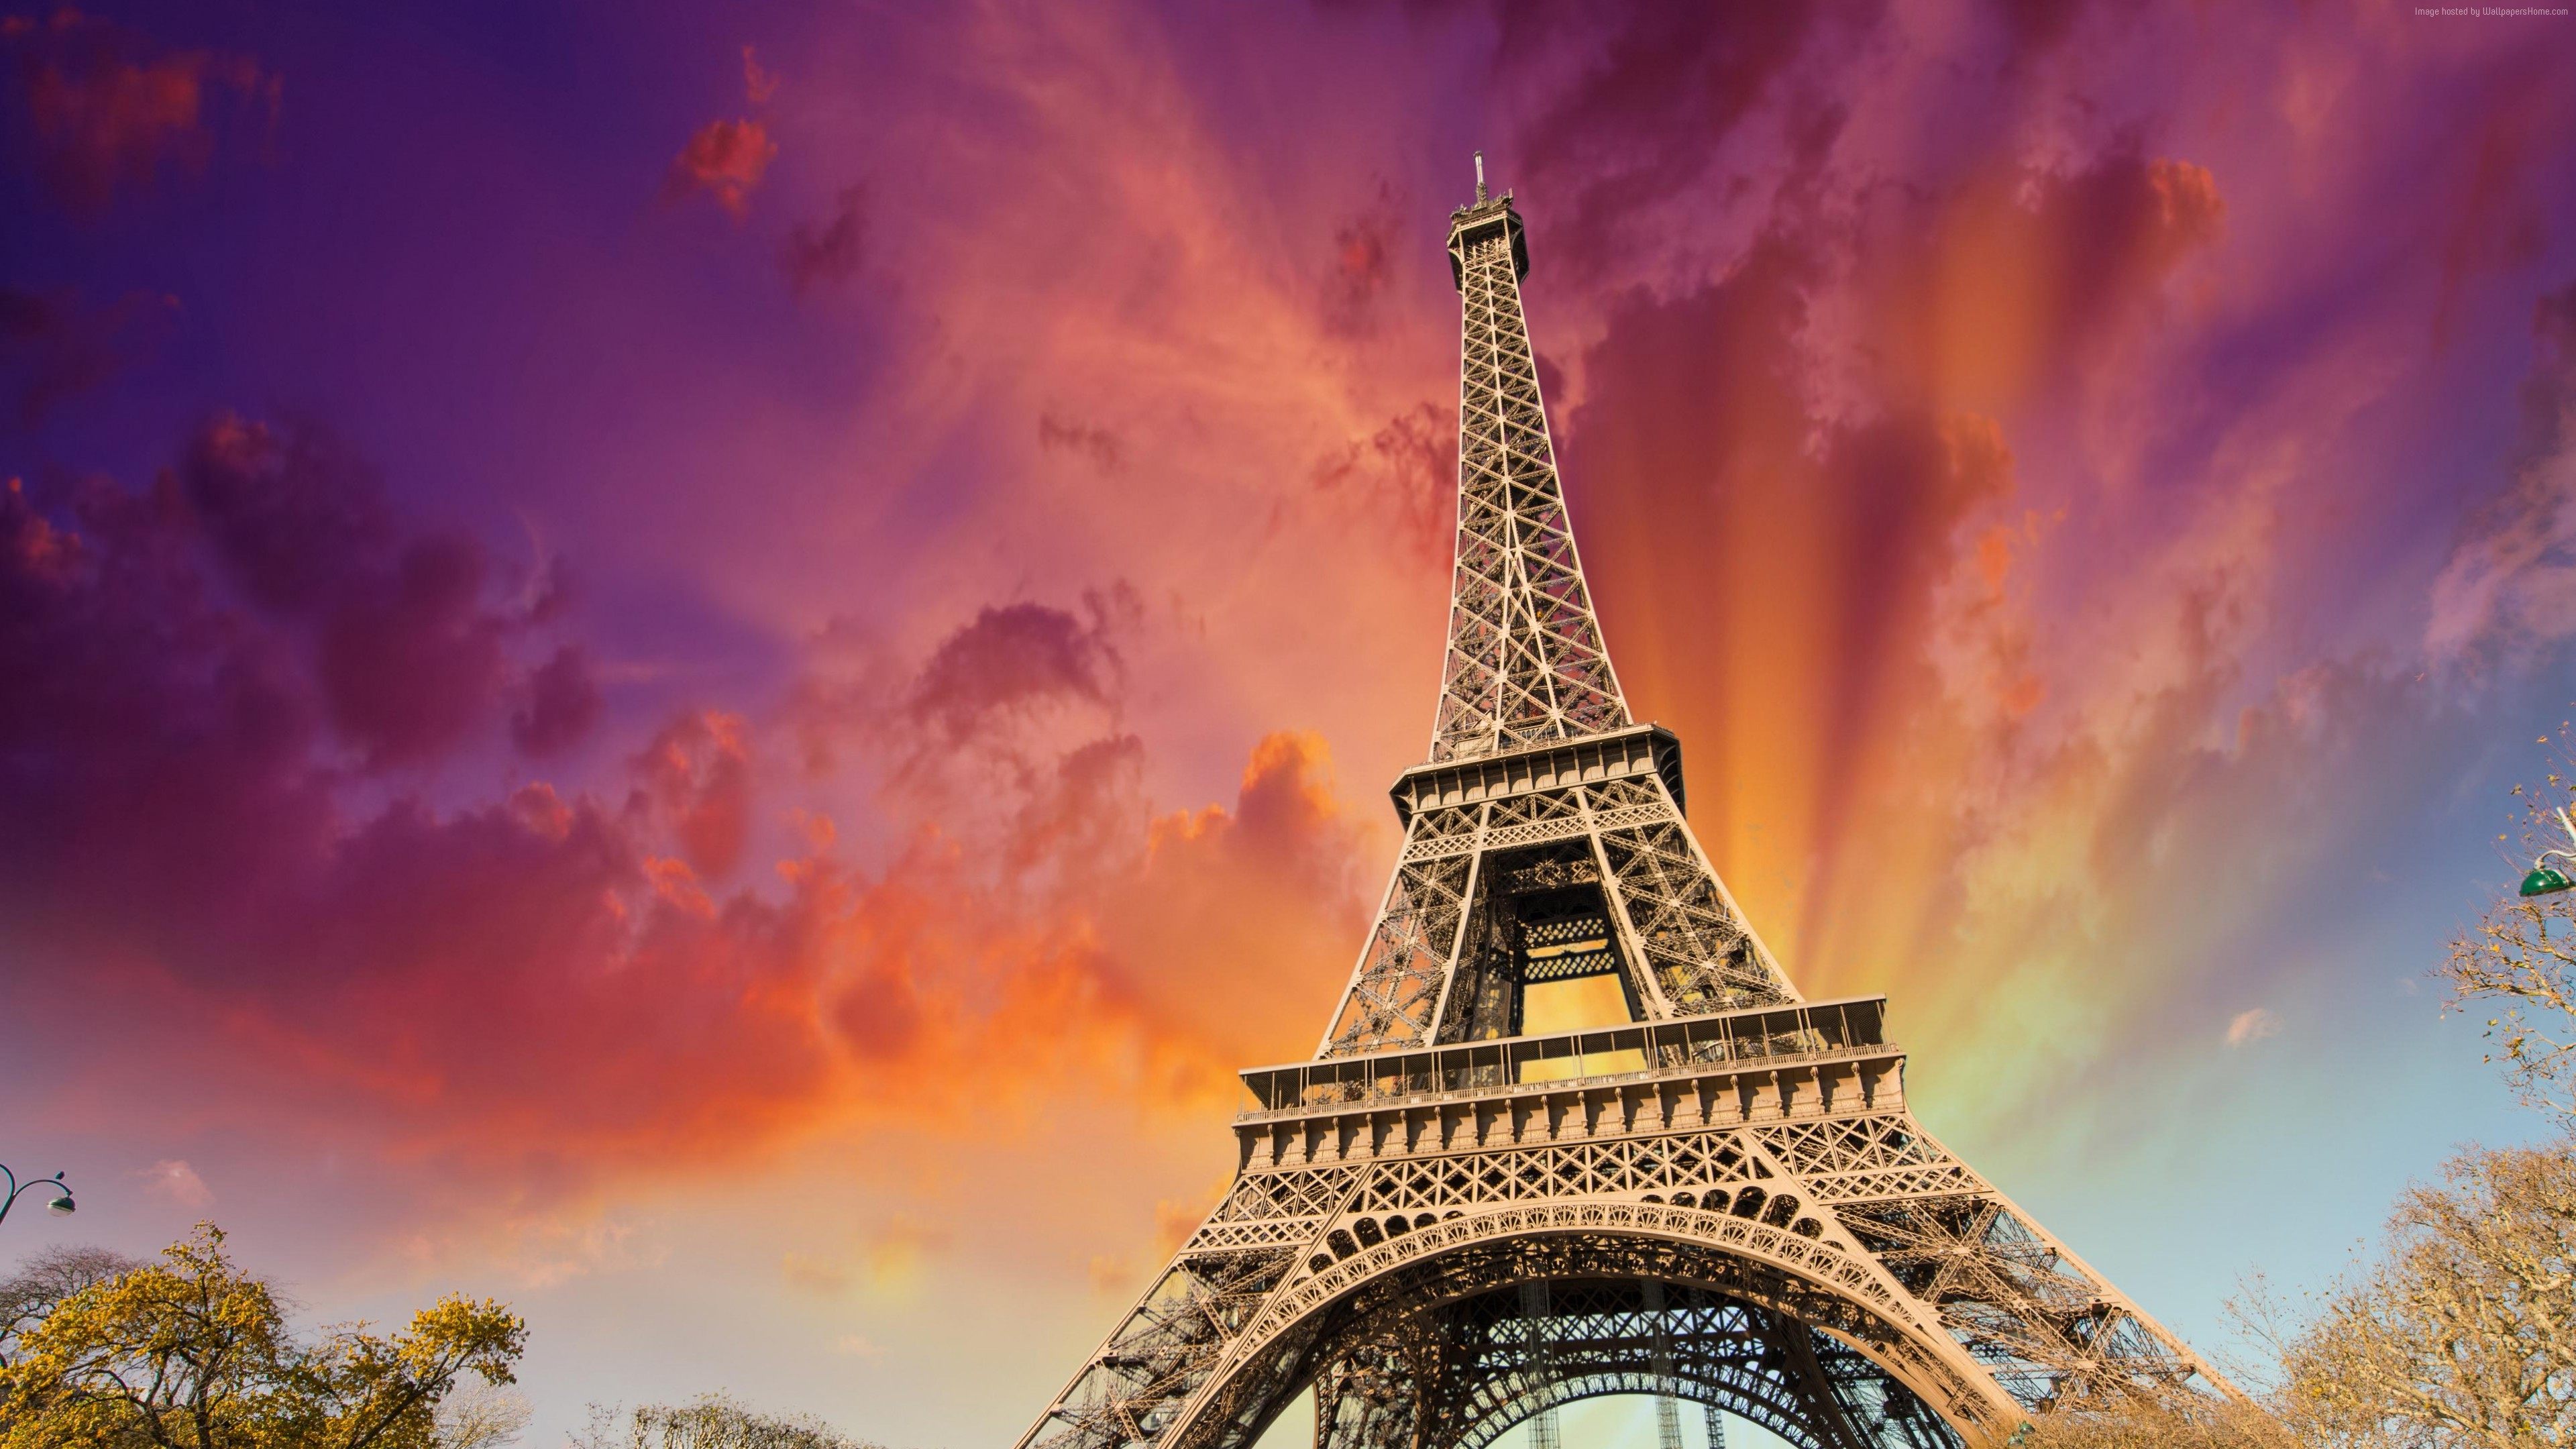 Free download Paris eiffel tower wallpapers Wallpapers for all [3840x2160]  for your Desktop, Mobile & Tablet | Explore 30+ Paris France Eiffel Tower  Wallpapers | Eiffel Tower Wallpaper, Eiffel Tower Background, Eiffel Tower  Backgrounds